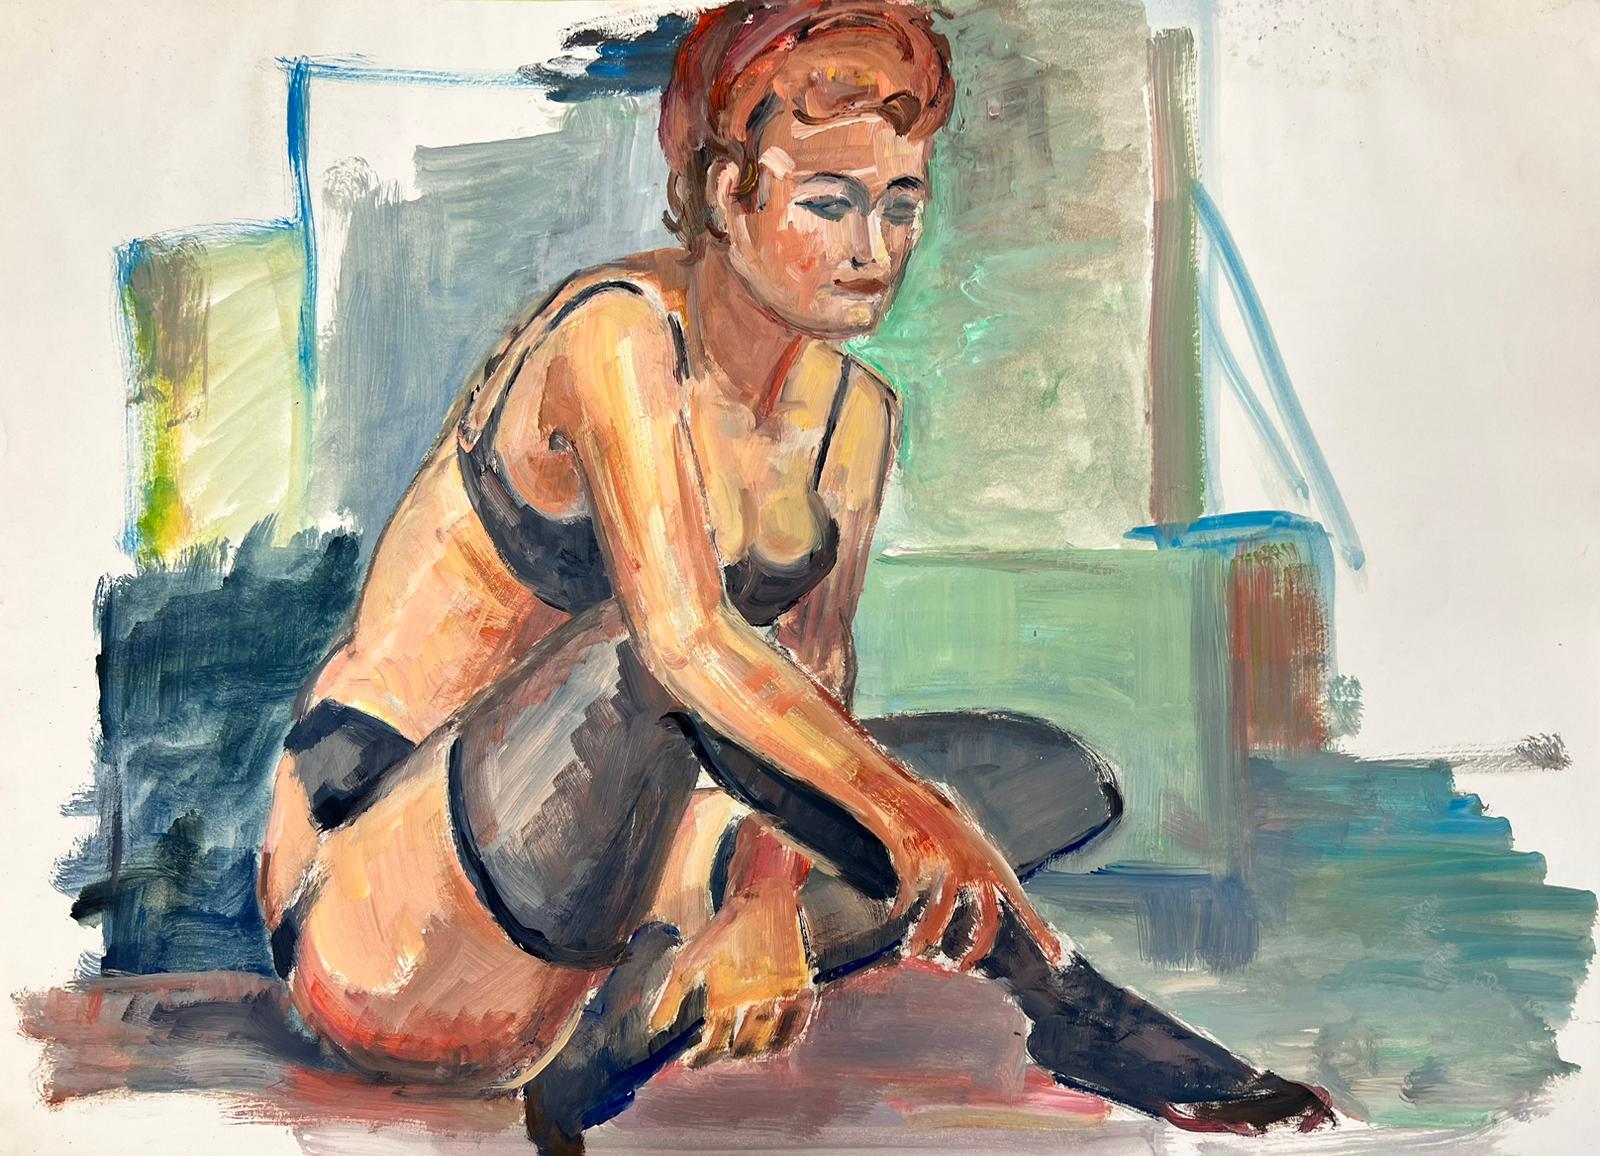 The Artists Model
Nude Lady Model
French School, circa 1970's
oil painting on card, unframed
size: 18 x 26 inches
condition: overall very good, a very few light markings to the surface but nothing detrimental to the appeal and appearance of the